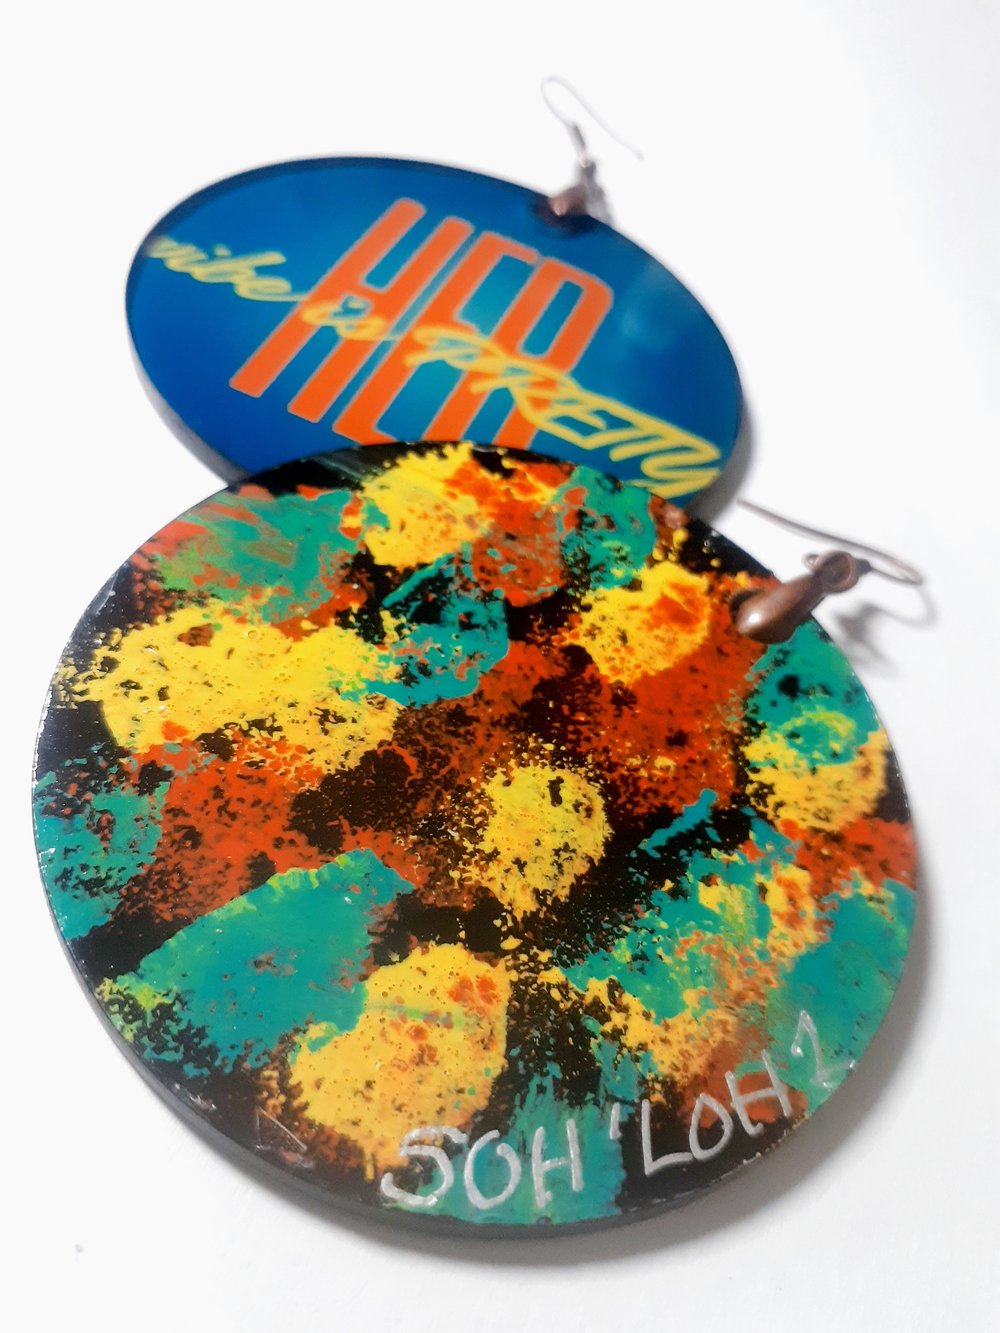 Image of Her Vibe is Pretty, Sublimated earrings, Handmade jewelry